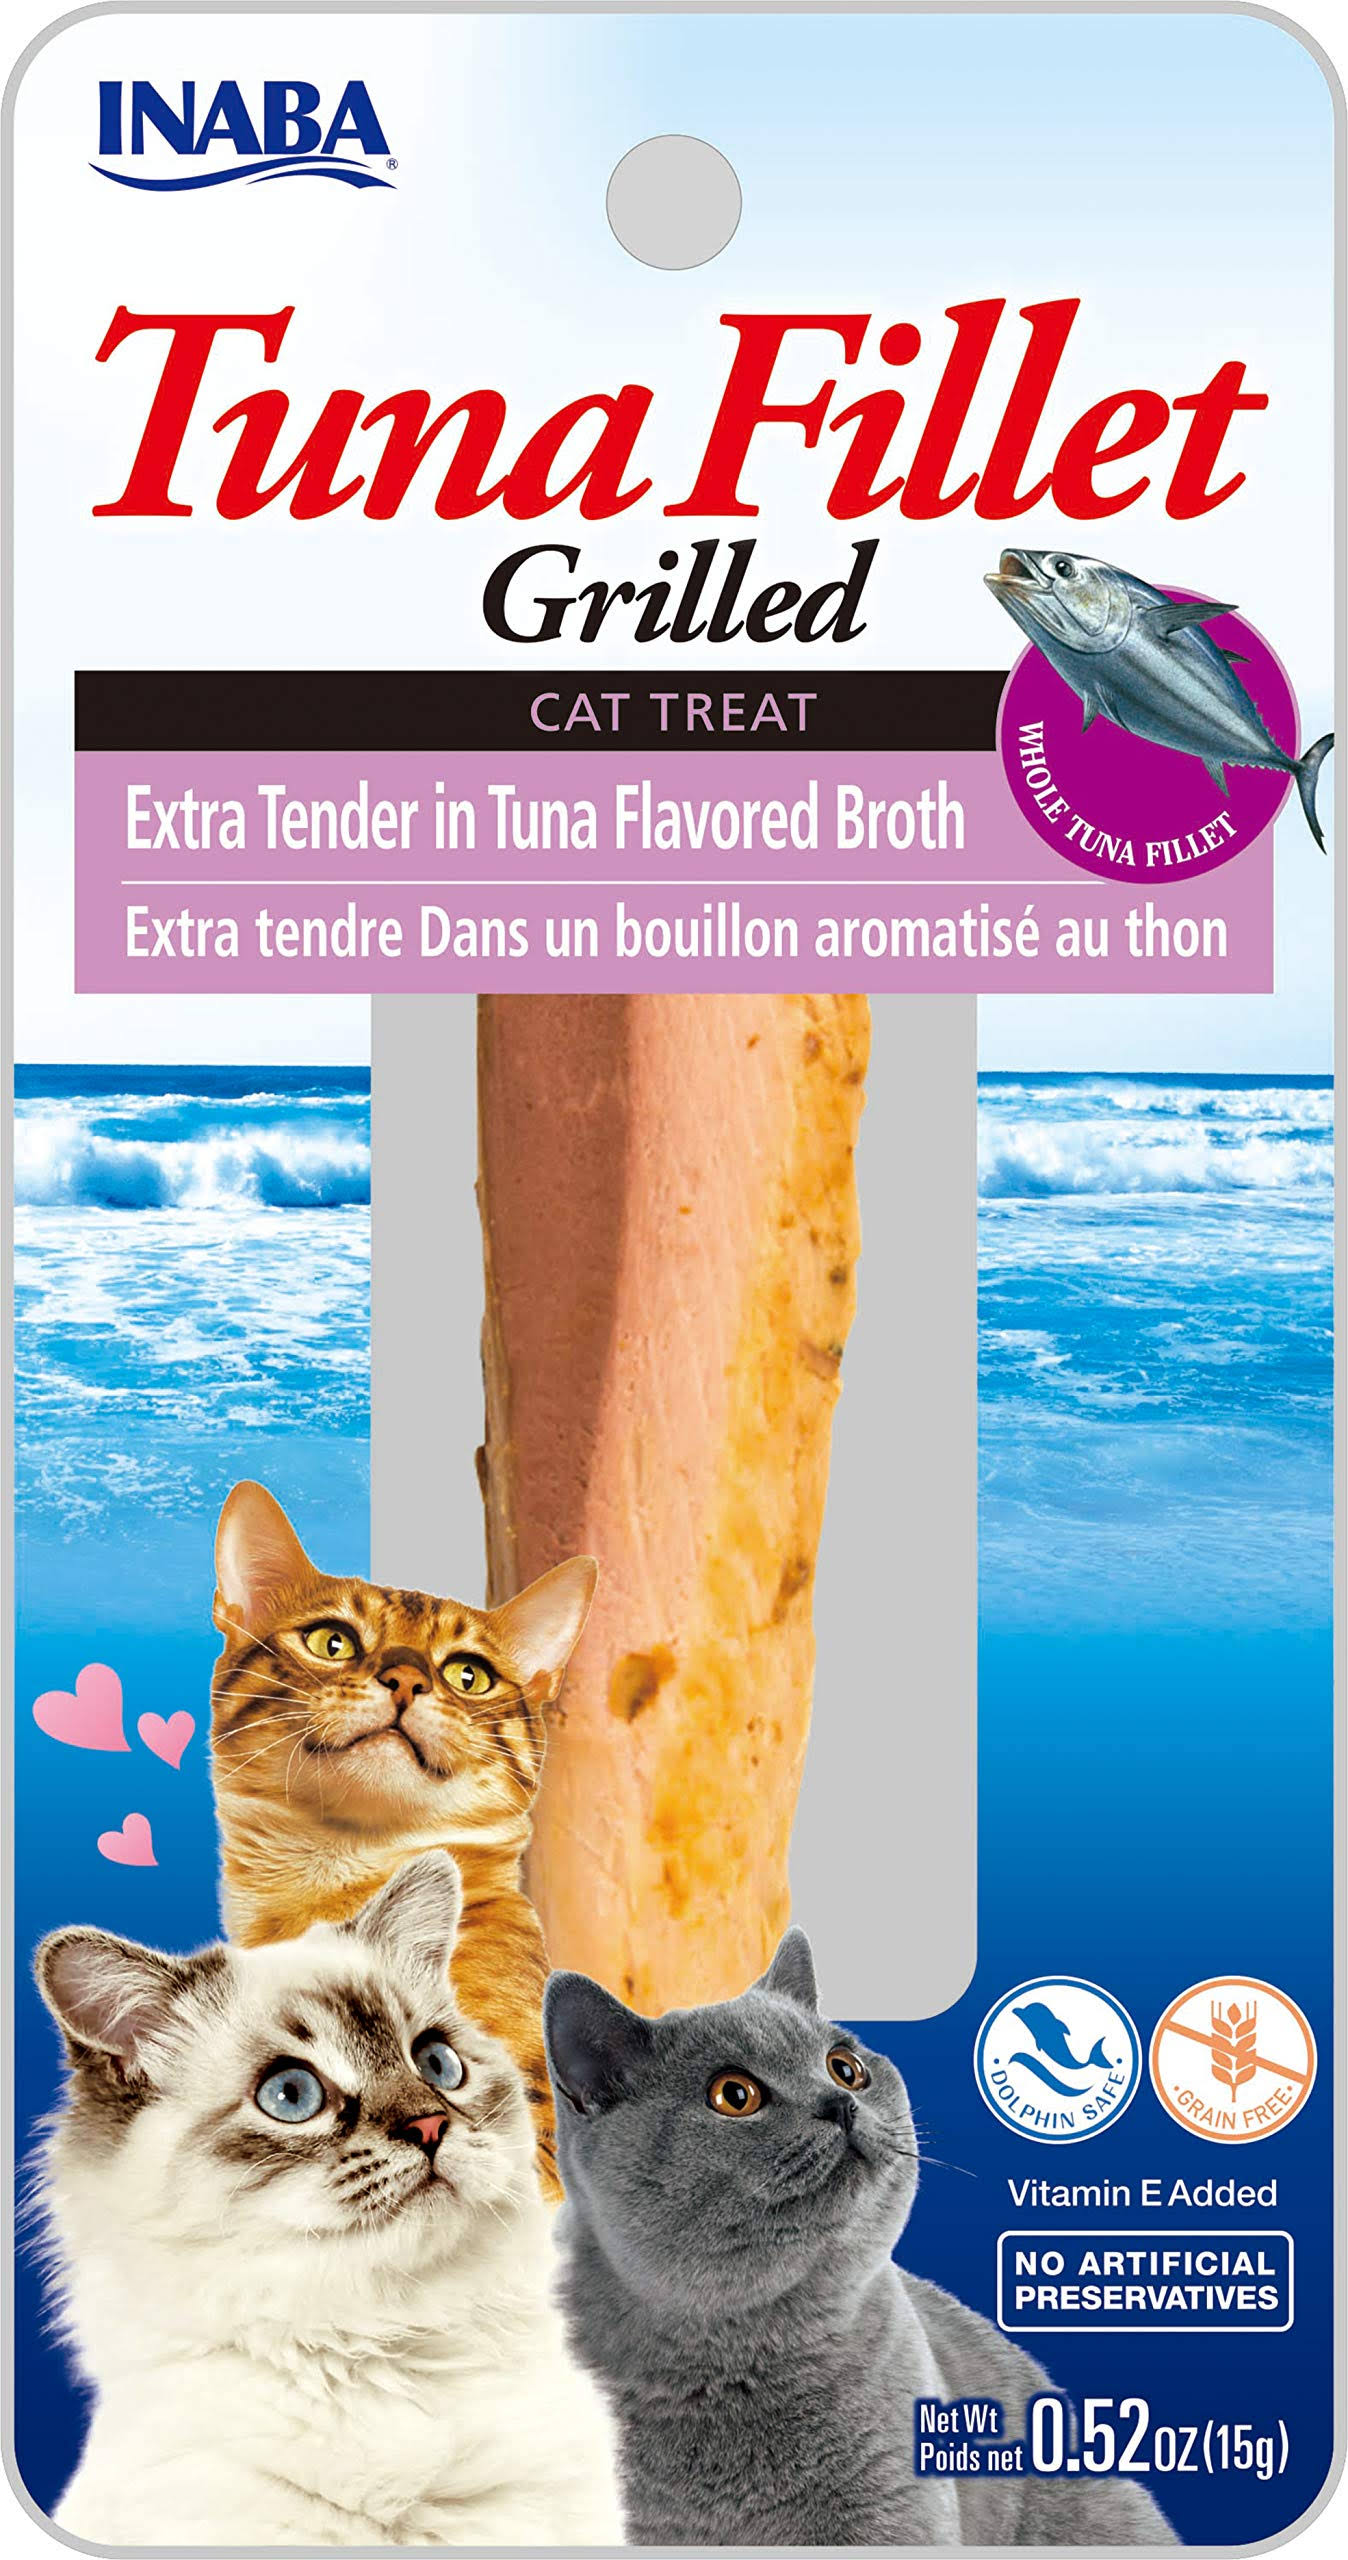 Inaba Cat Treat Grilled Tuna Fillet Extra Tender in Tuna Broth 15g